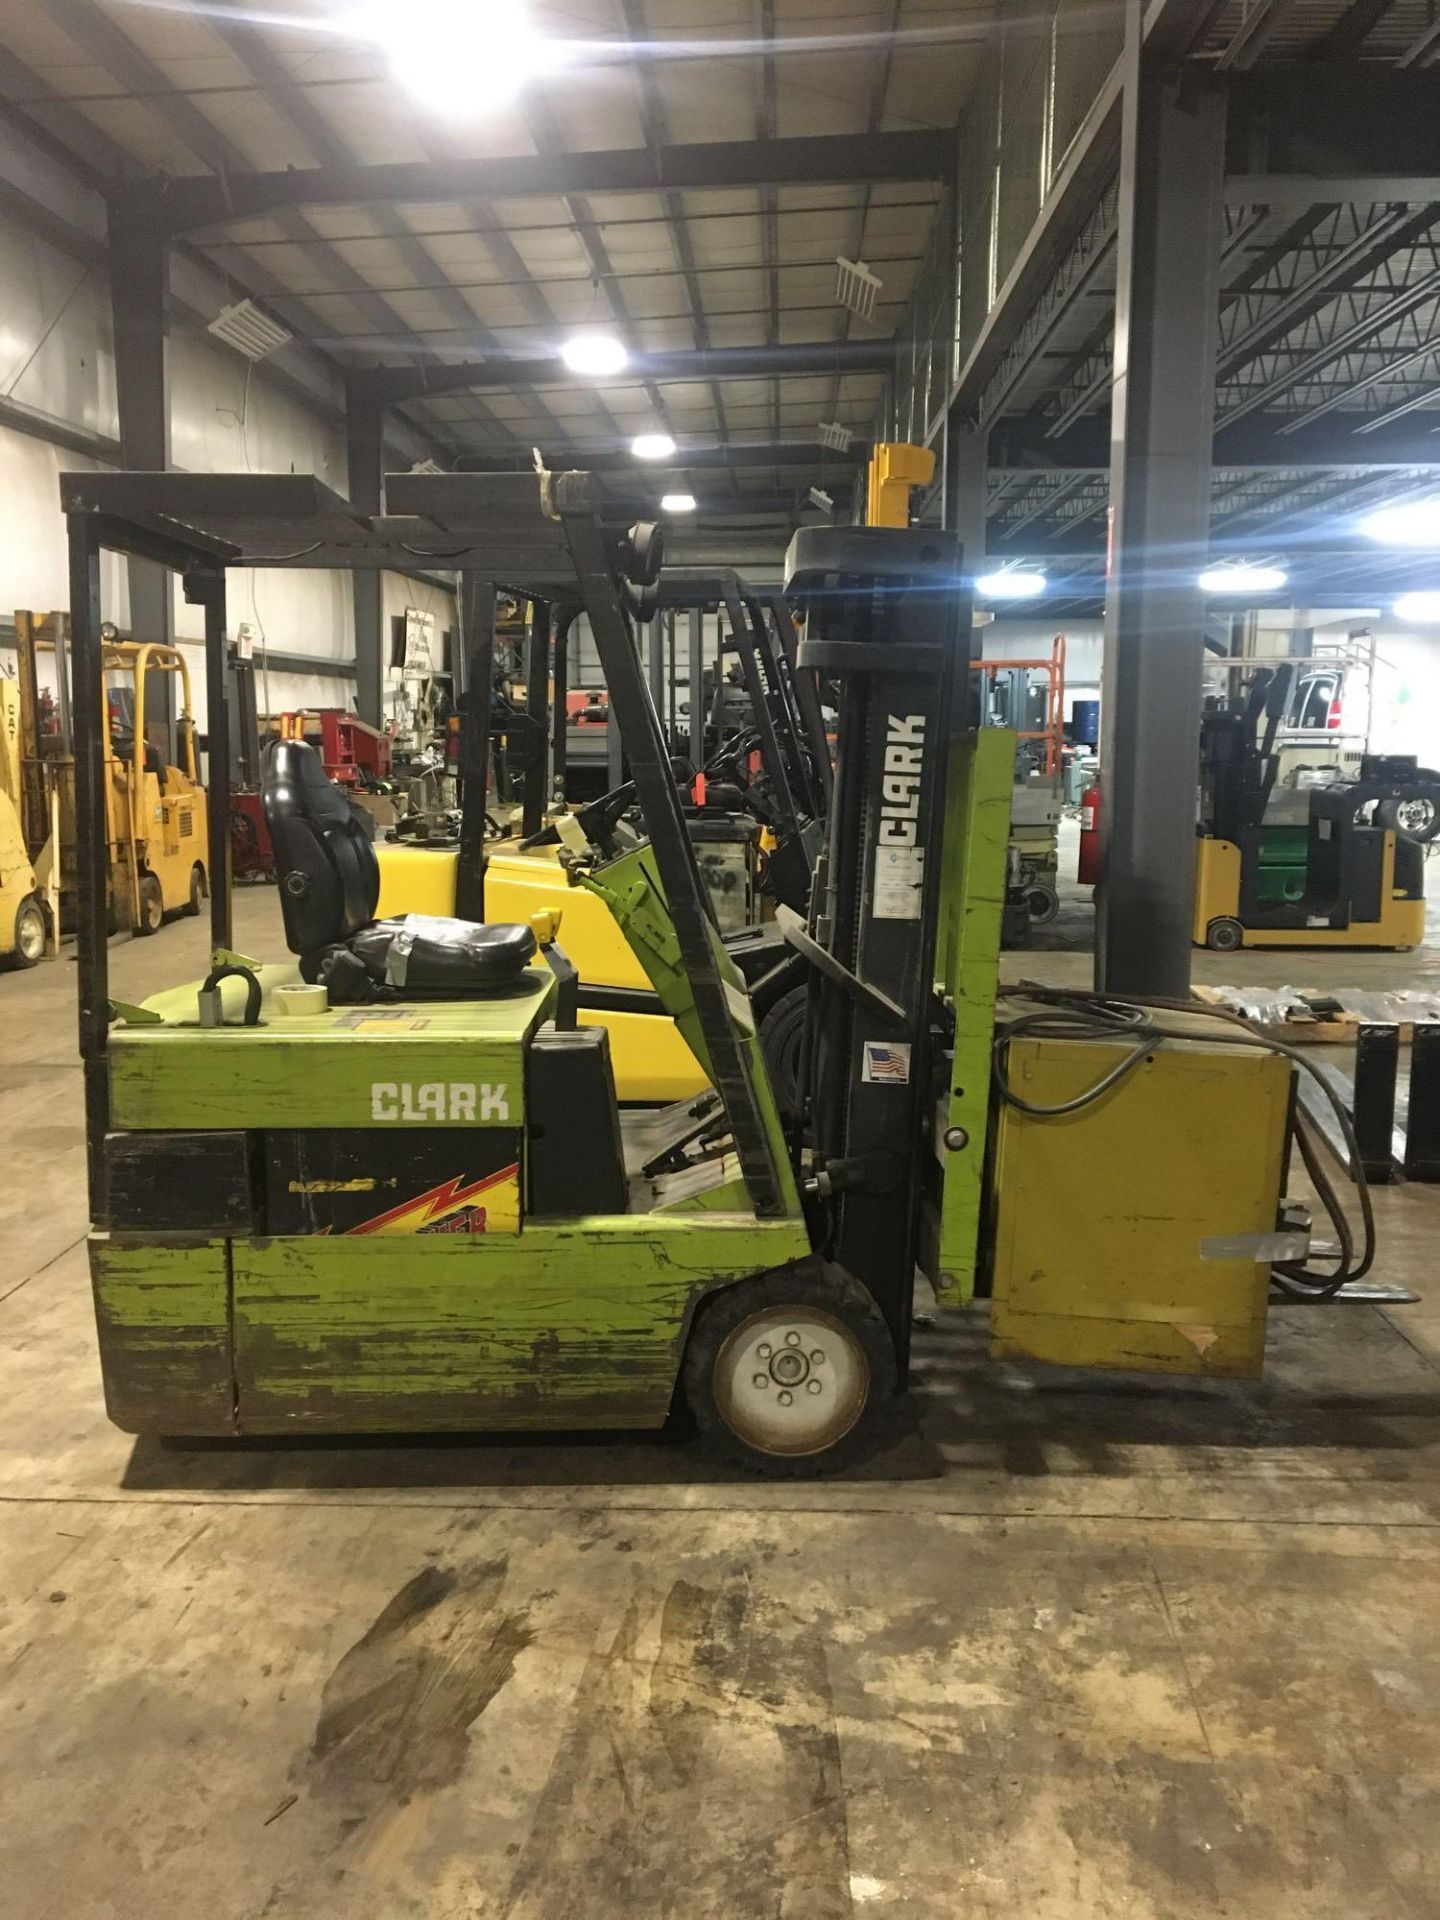 Electric Forklift, Clark, TM20, Max Ht 170", Max Cap 3425lbs, Hrs Unknown